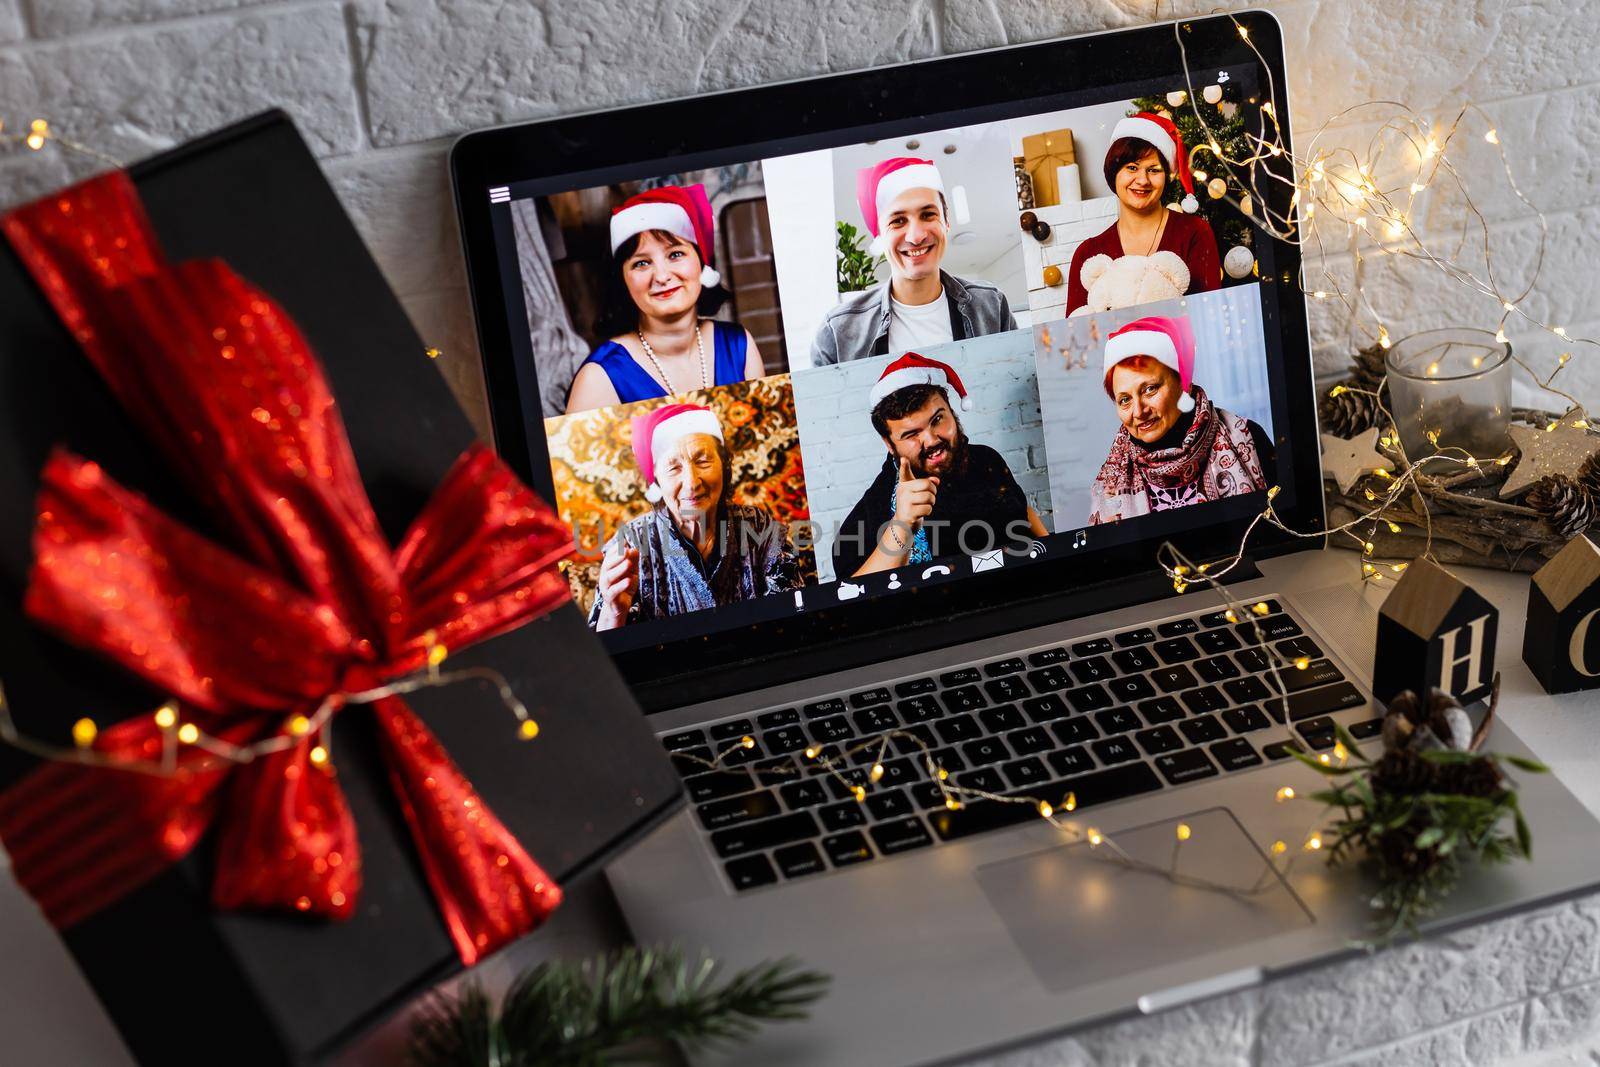 video call celebrating christmas by laptop online during coronavirus outbreak by Andelov13